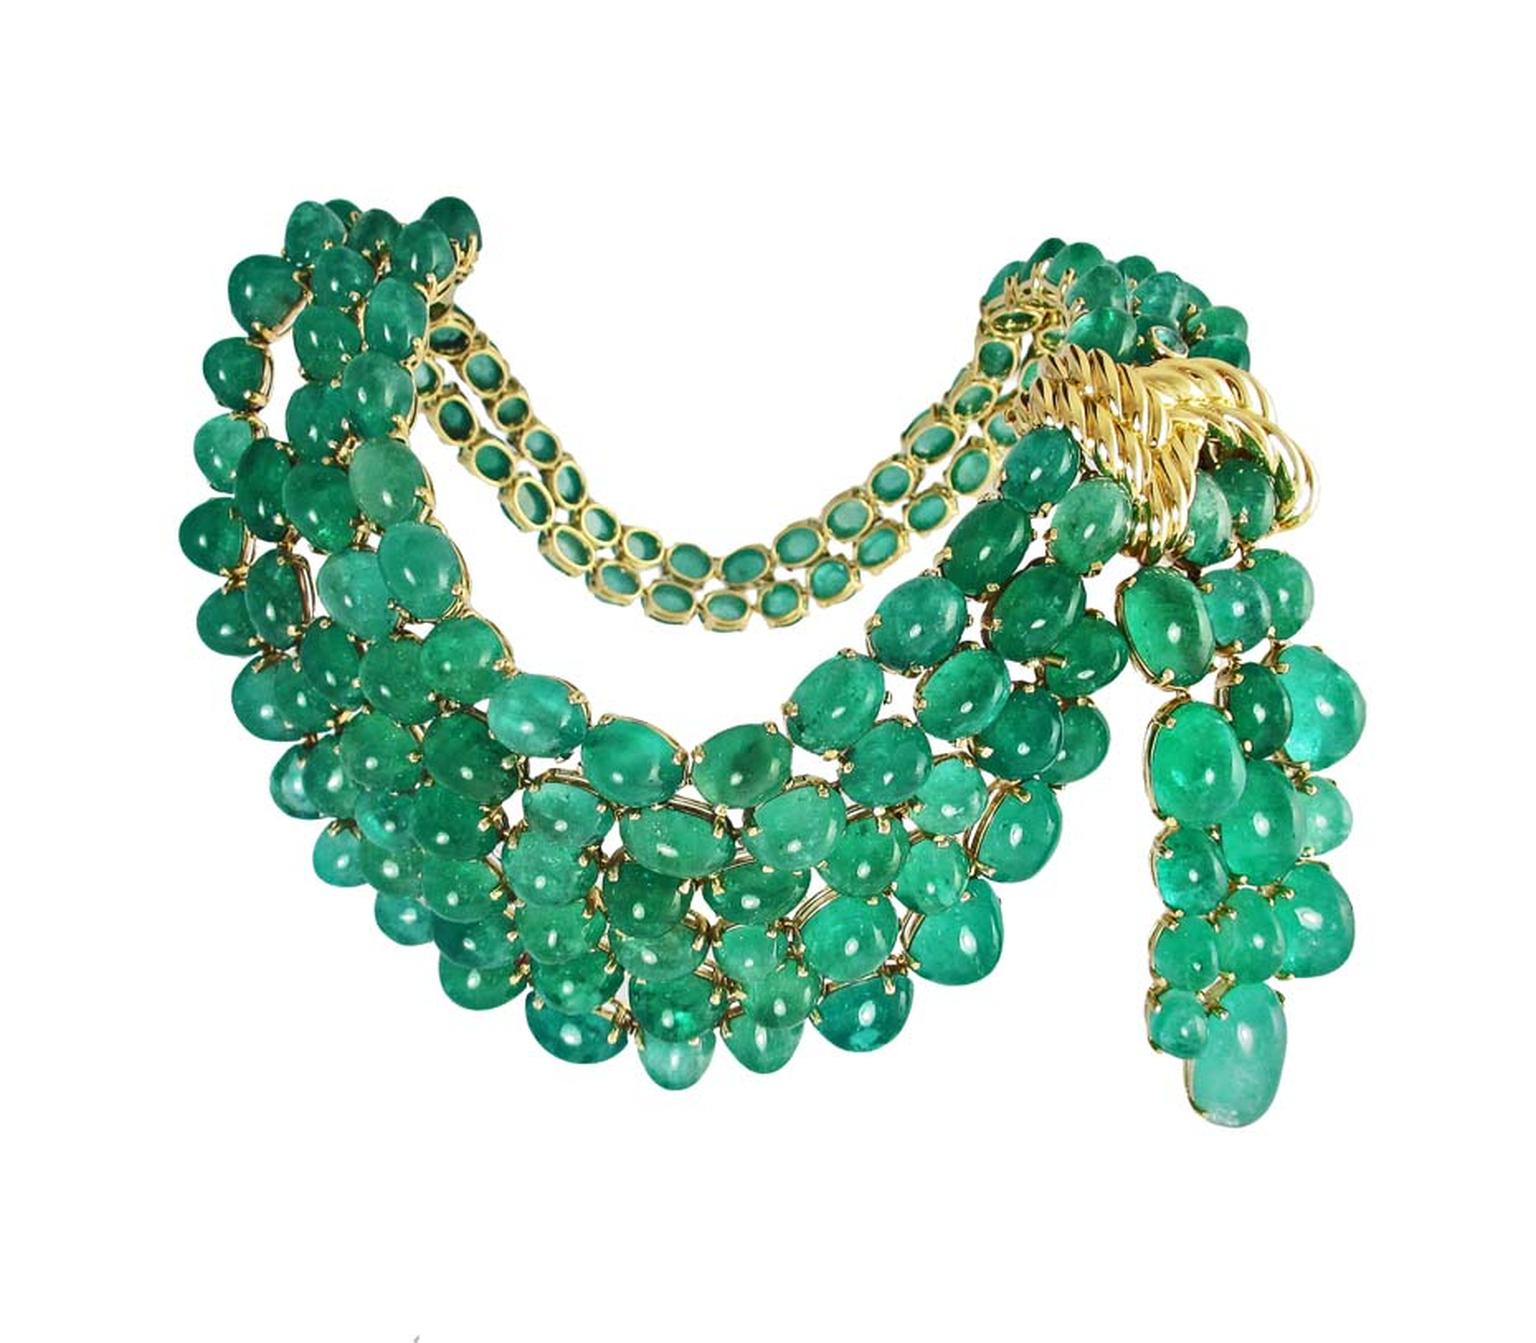 The Verdura Scarf emerald necklace, from the 75th Anniversary Collection, has been recreated for the first time since it was designed by Verdura in 1941 at the request of Dorothy Paley Hirshon.